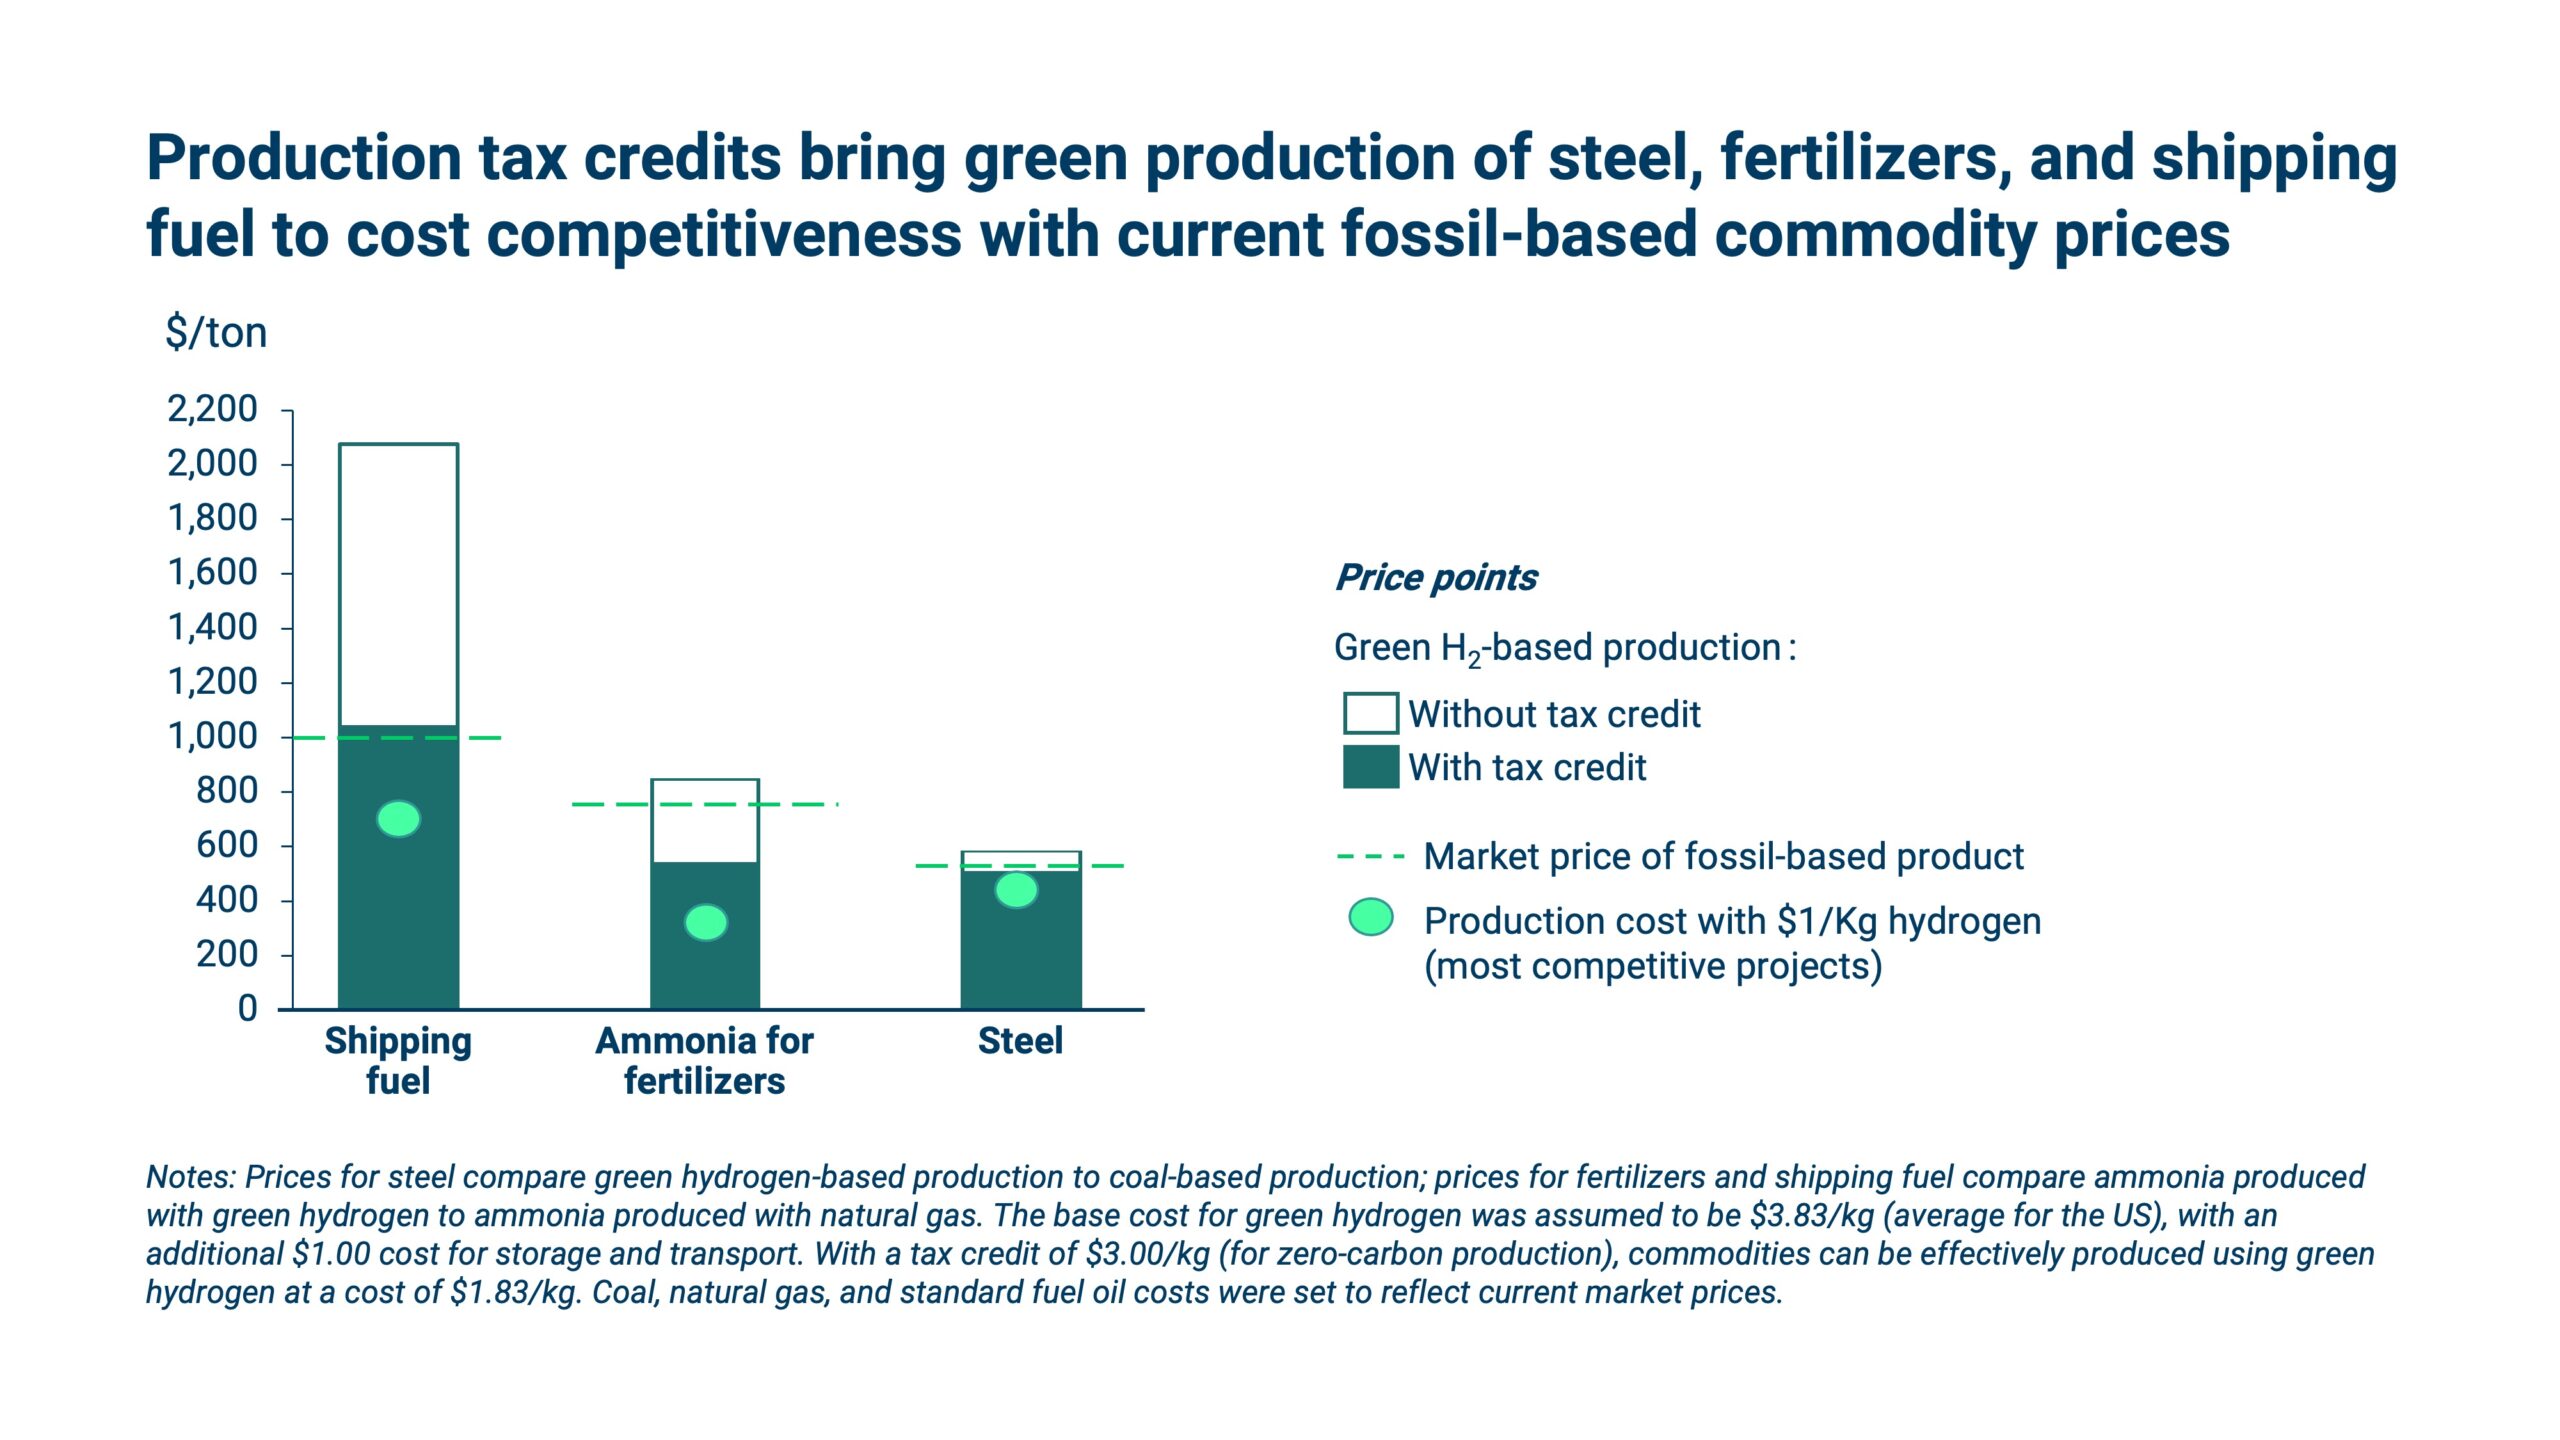 production tax credits bring green production of steel, fertilizers, and shipping fuel to cost competitiveness with current fossil-based commodity prices